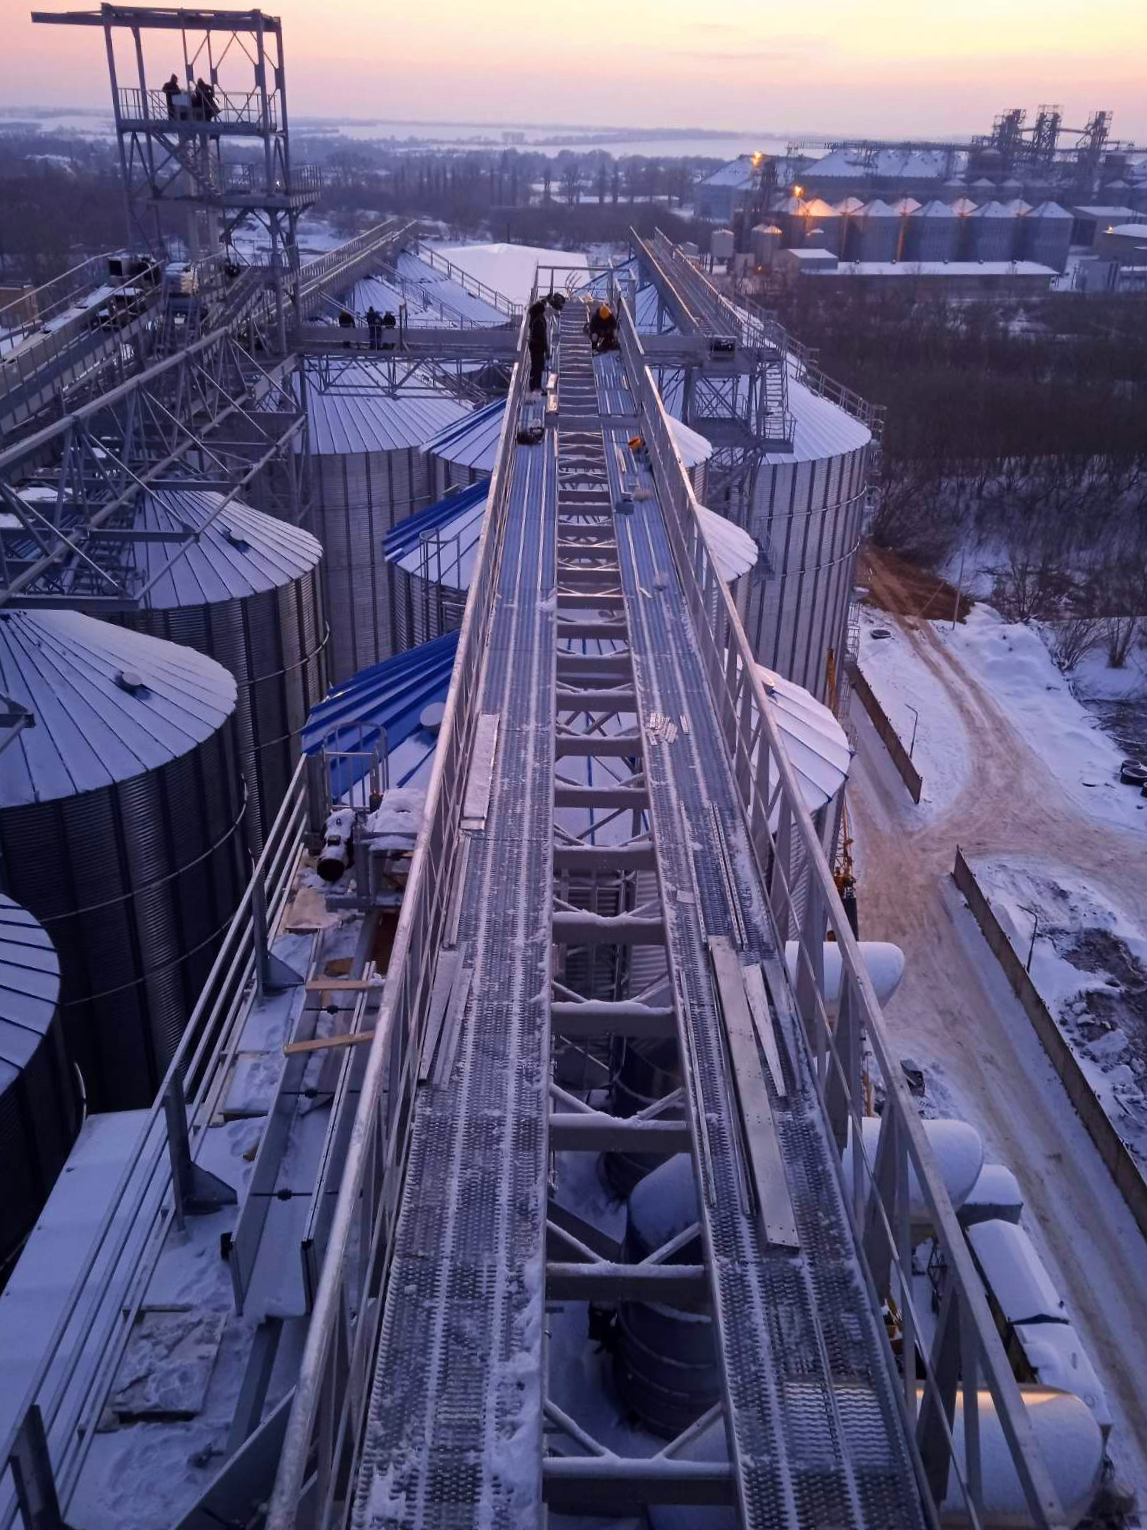 A grain storage facility with capacity of 100.000 t